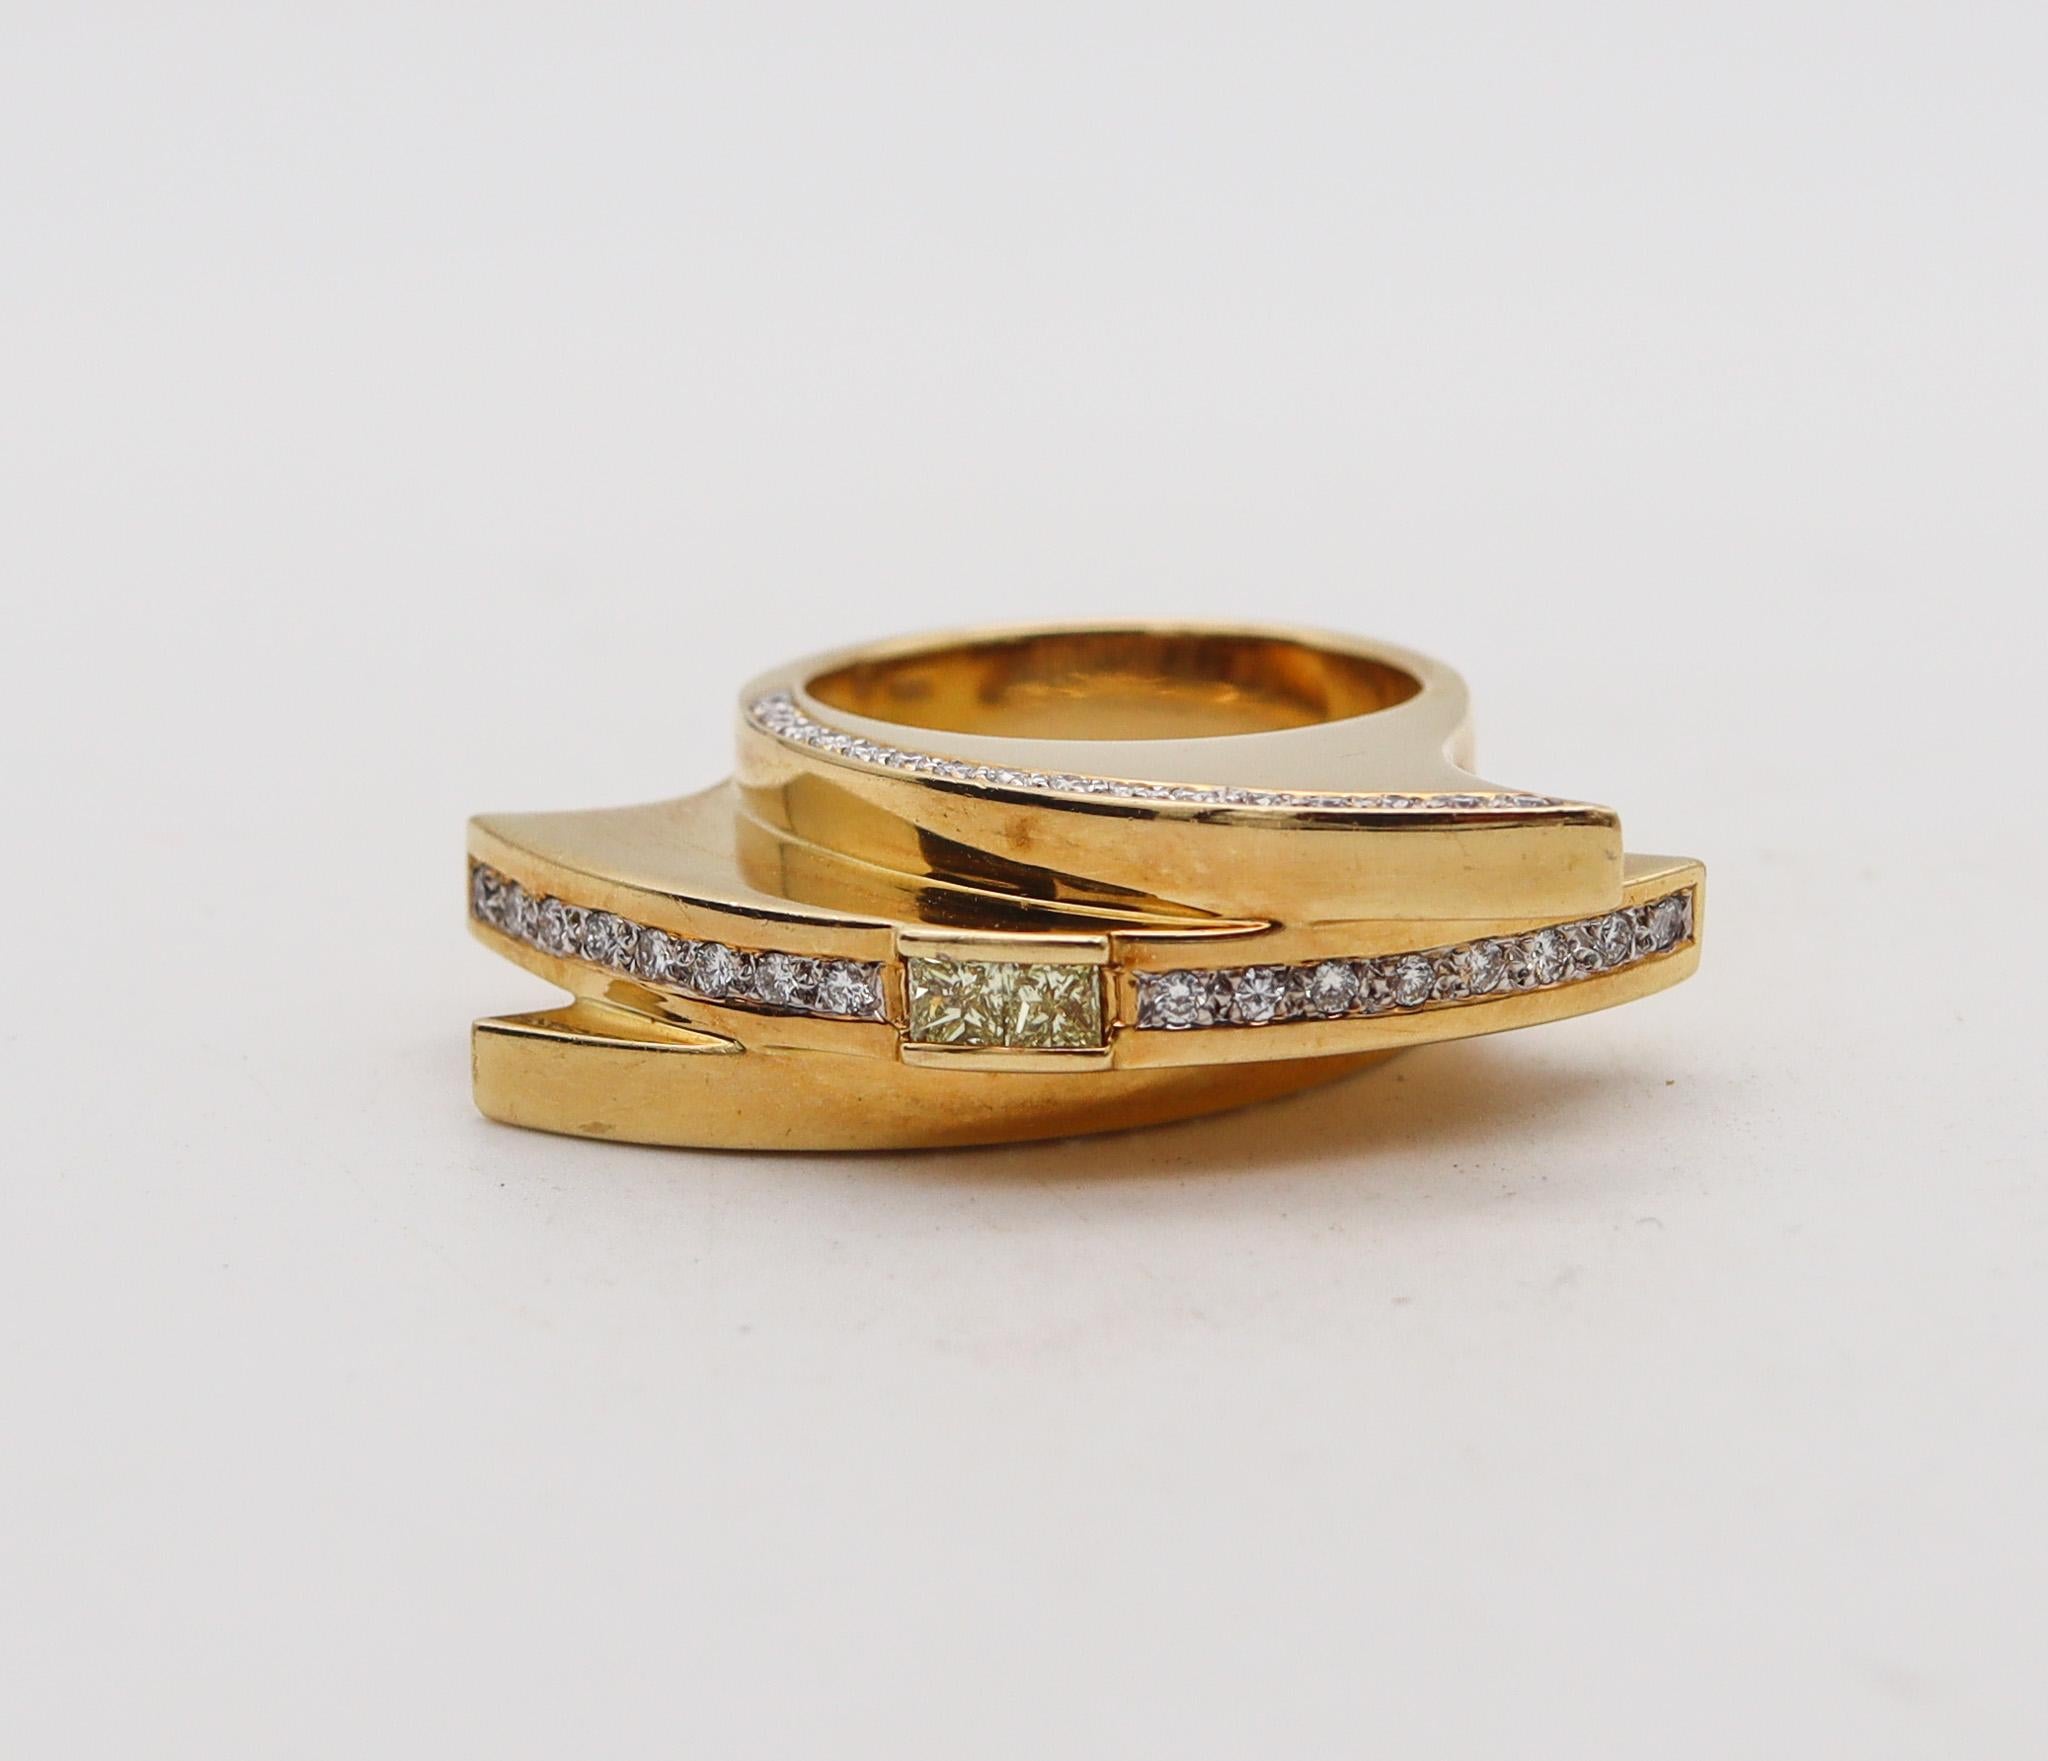 An sculptural cocktail ring with diamonds.

Fantastic studio sculptural ring created in Europe most probably in Germany, back in the 1980. This cocktail ring has been crafted with geometric patterns in solid yellow gold of 18 karats with high